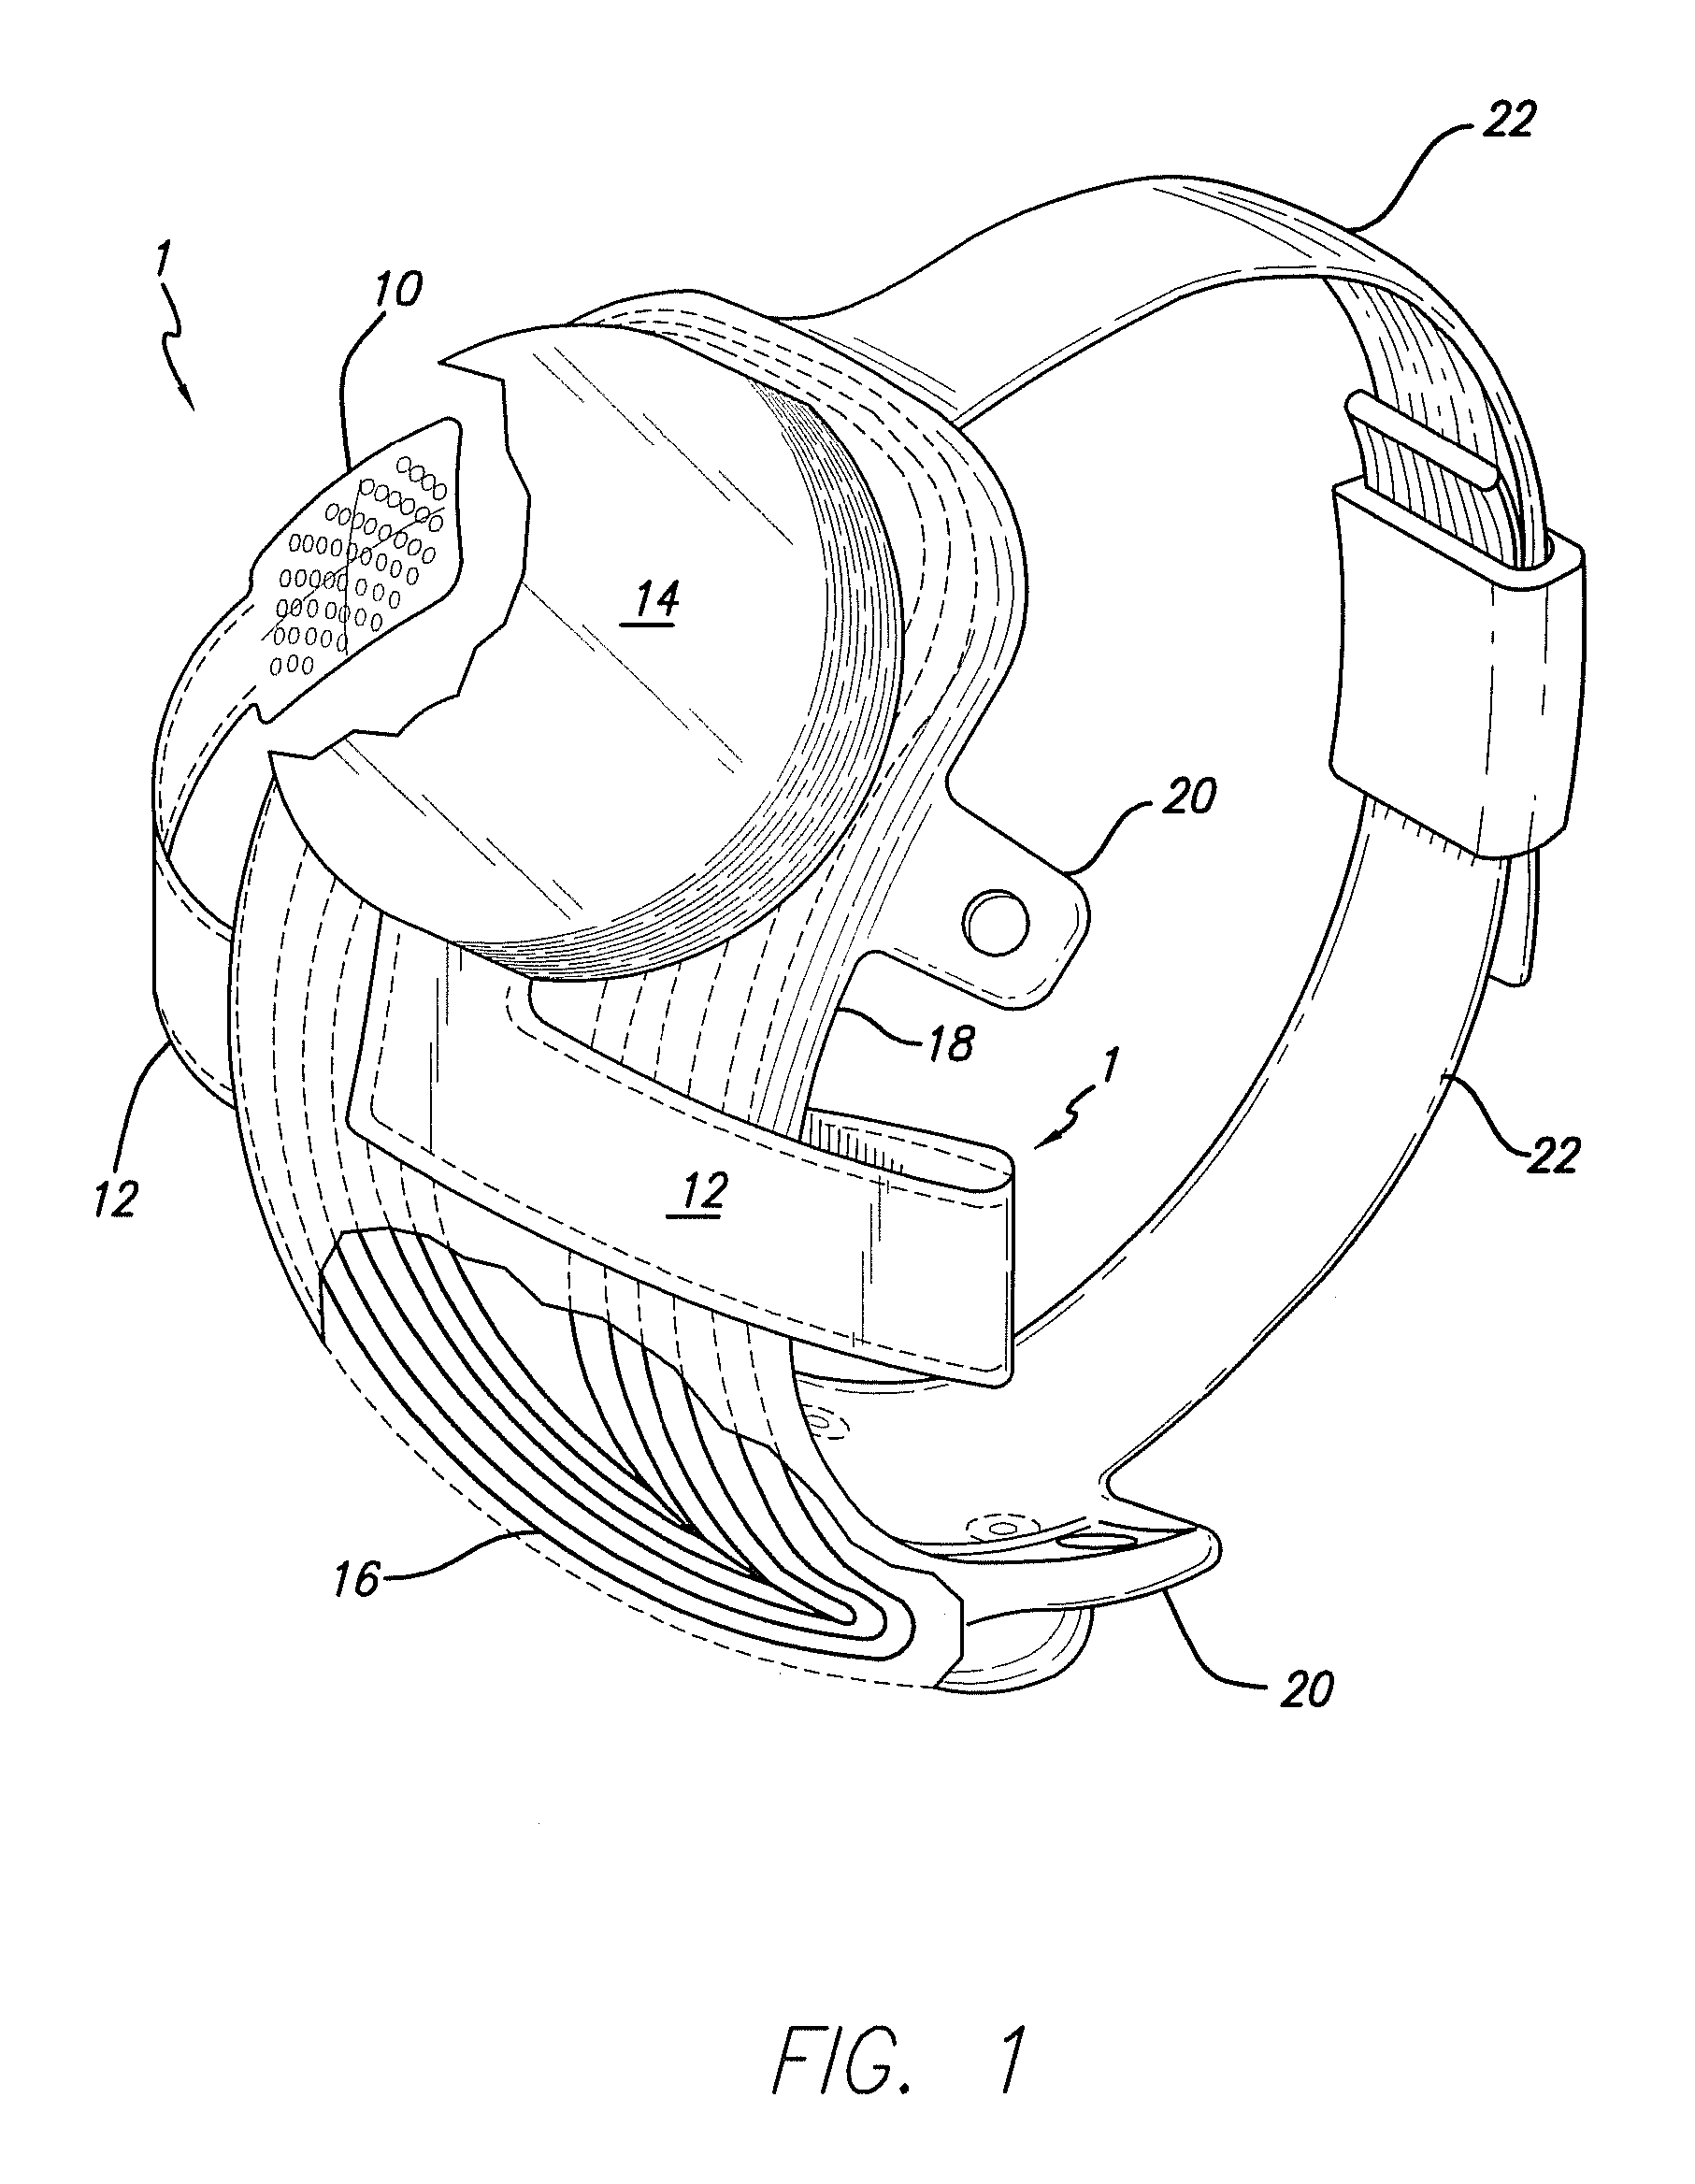 Flexible circuit electrode array with at least one tack opening